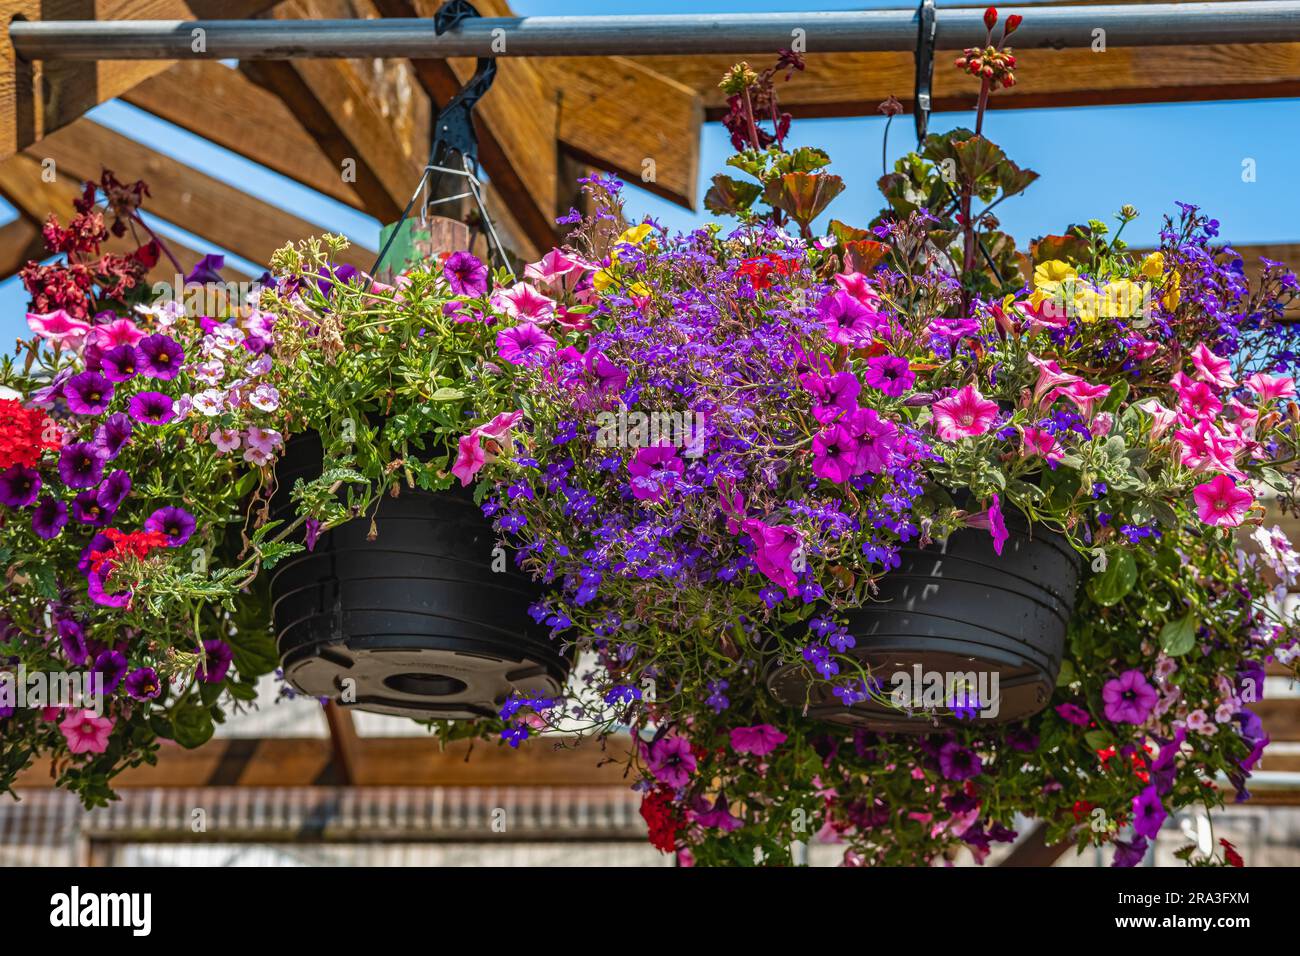 Baskets of hanging petunia flowers on balcony. Petunia flower ornamental plant. Purple and pink petunias in a hanging basket. Pots of bright calibrach Stock Photo